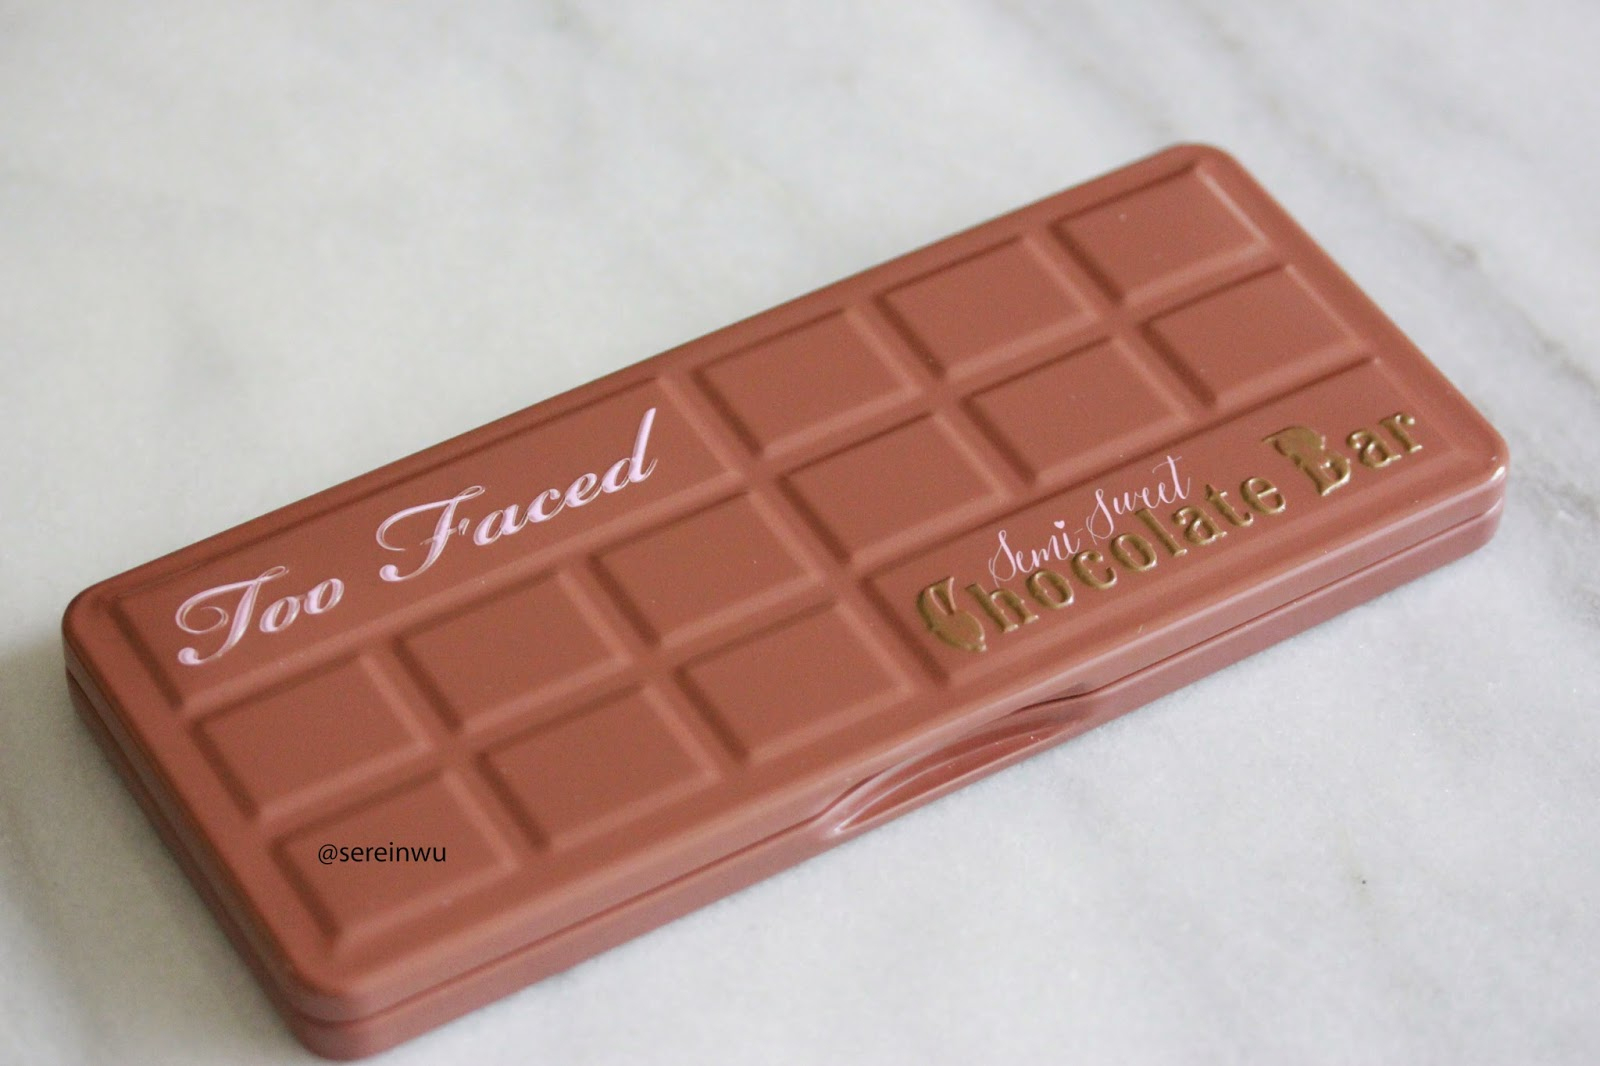 Dress Yourself Happy By Serein: Too Faced Semi Sweet Chocolate Bar concernant Candy Bar Palette intéressant